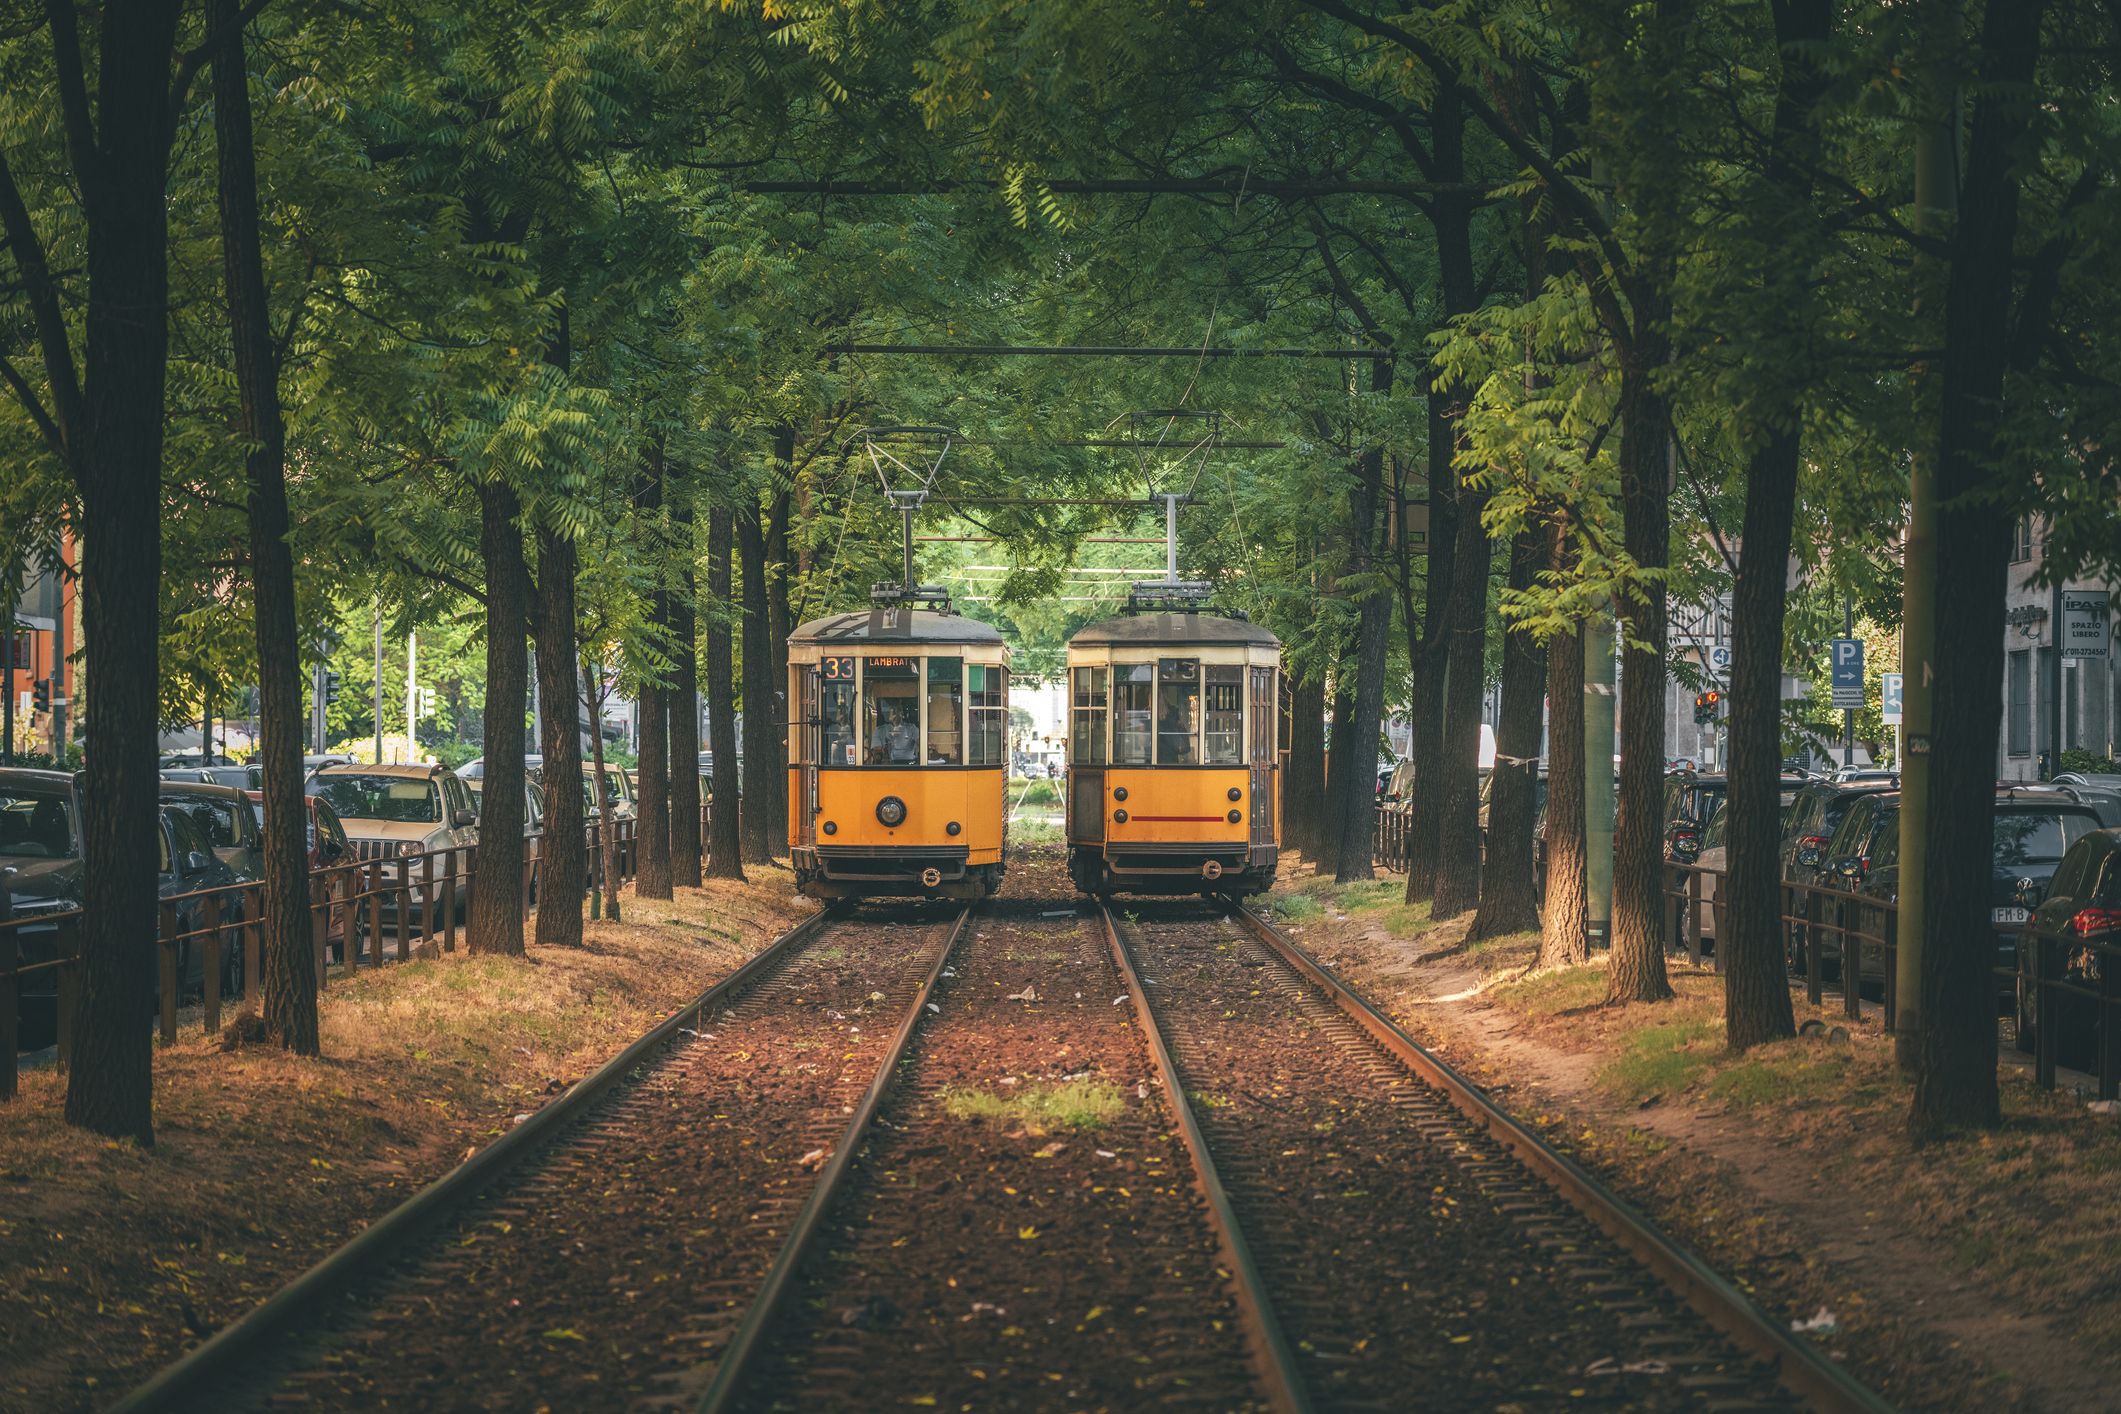 https://hips.hearstapps.com/hmg-prod/images/traditional-old-tram-in-milan-italy-royalty-free-image-1683550563.jpg